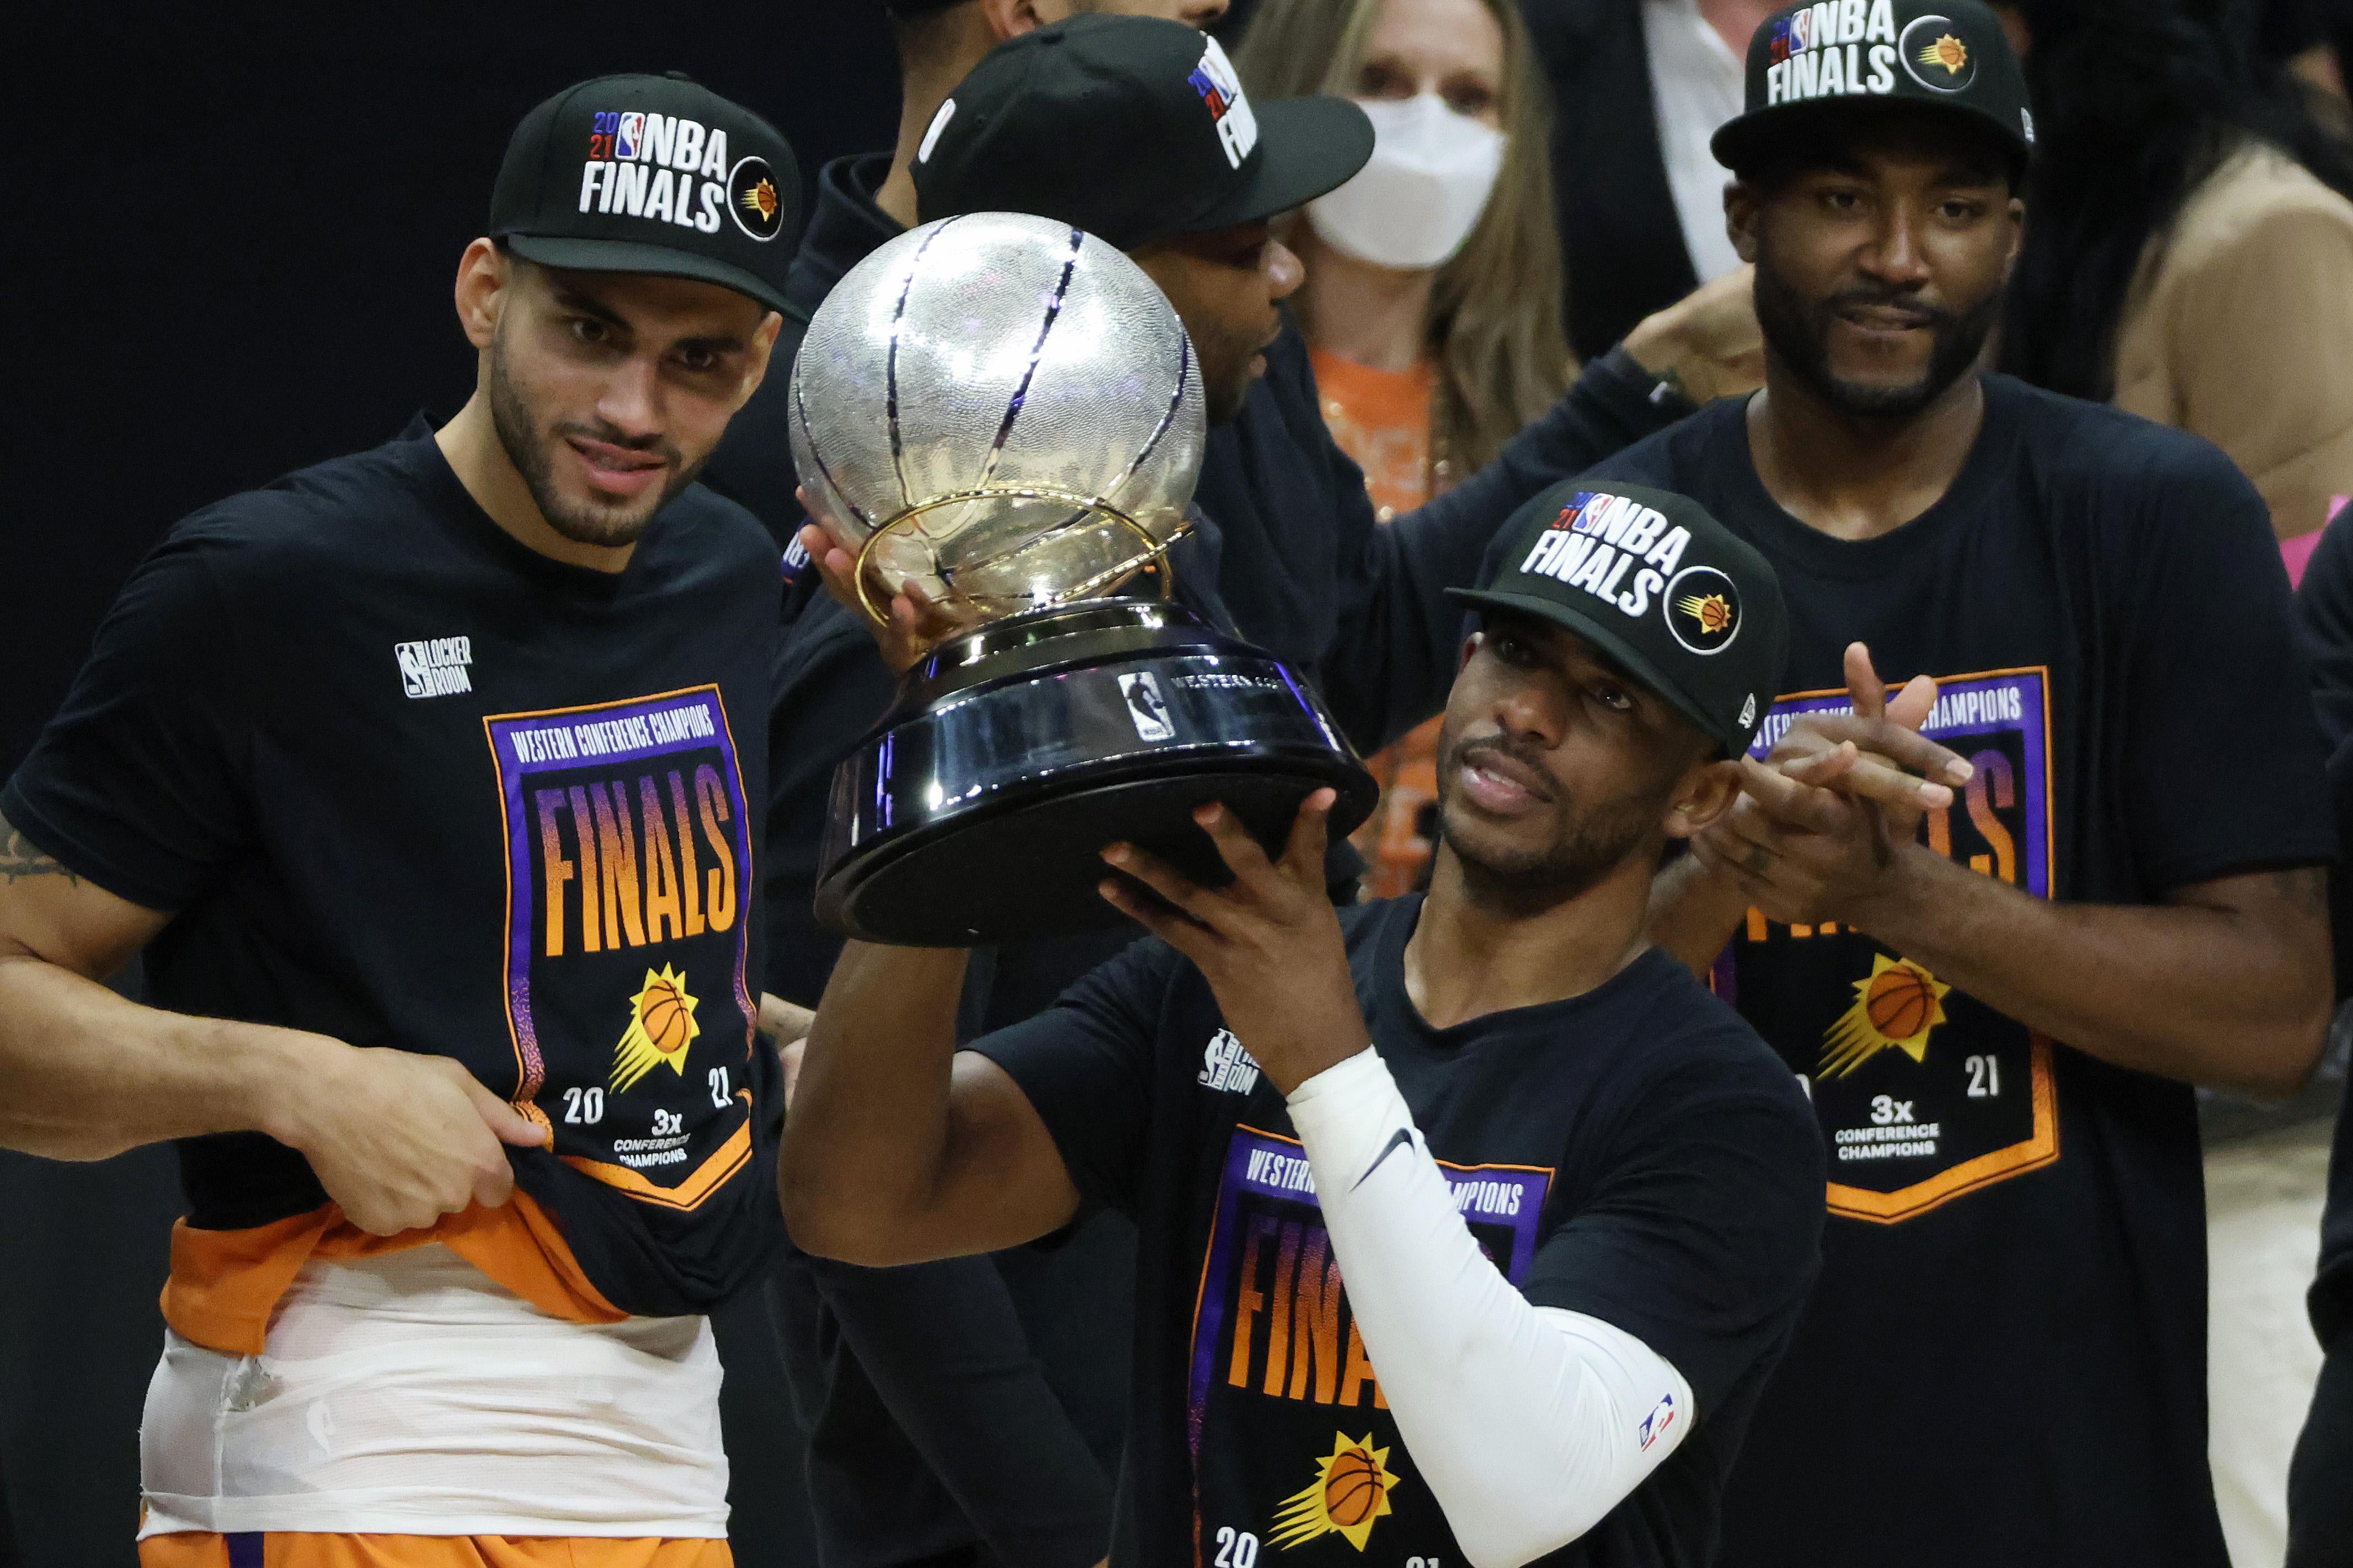 Chris Paul holds up the Western Conference championship trophy as he stands among his Suns teammates after they won Game 6